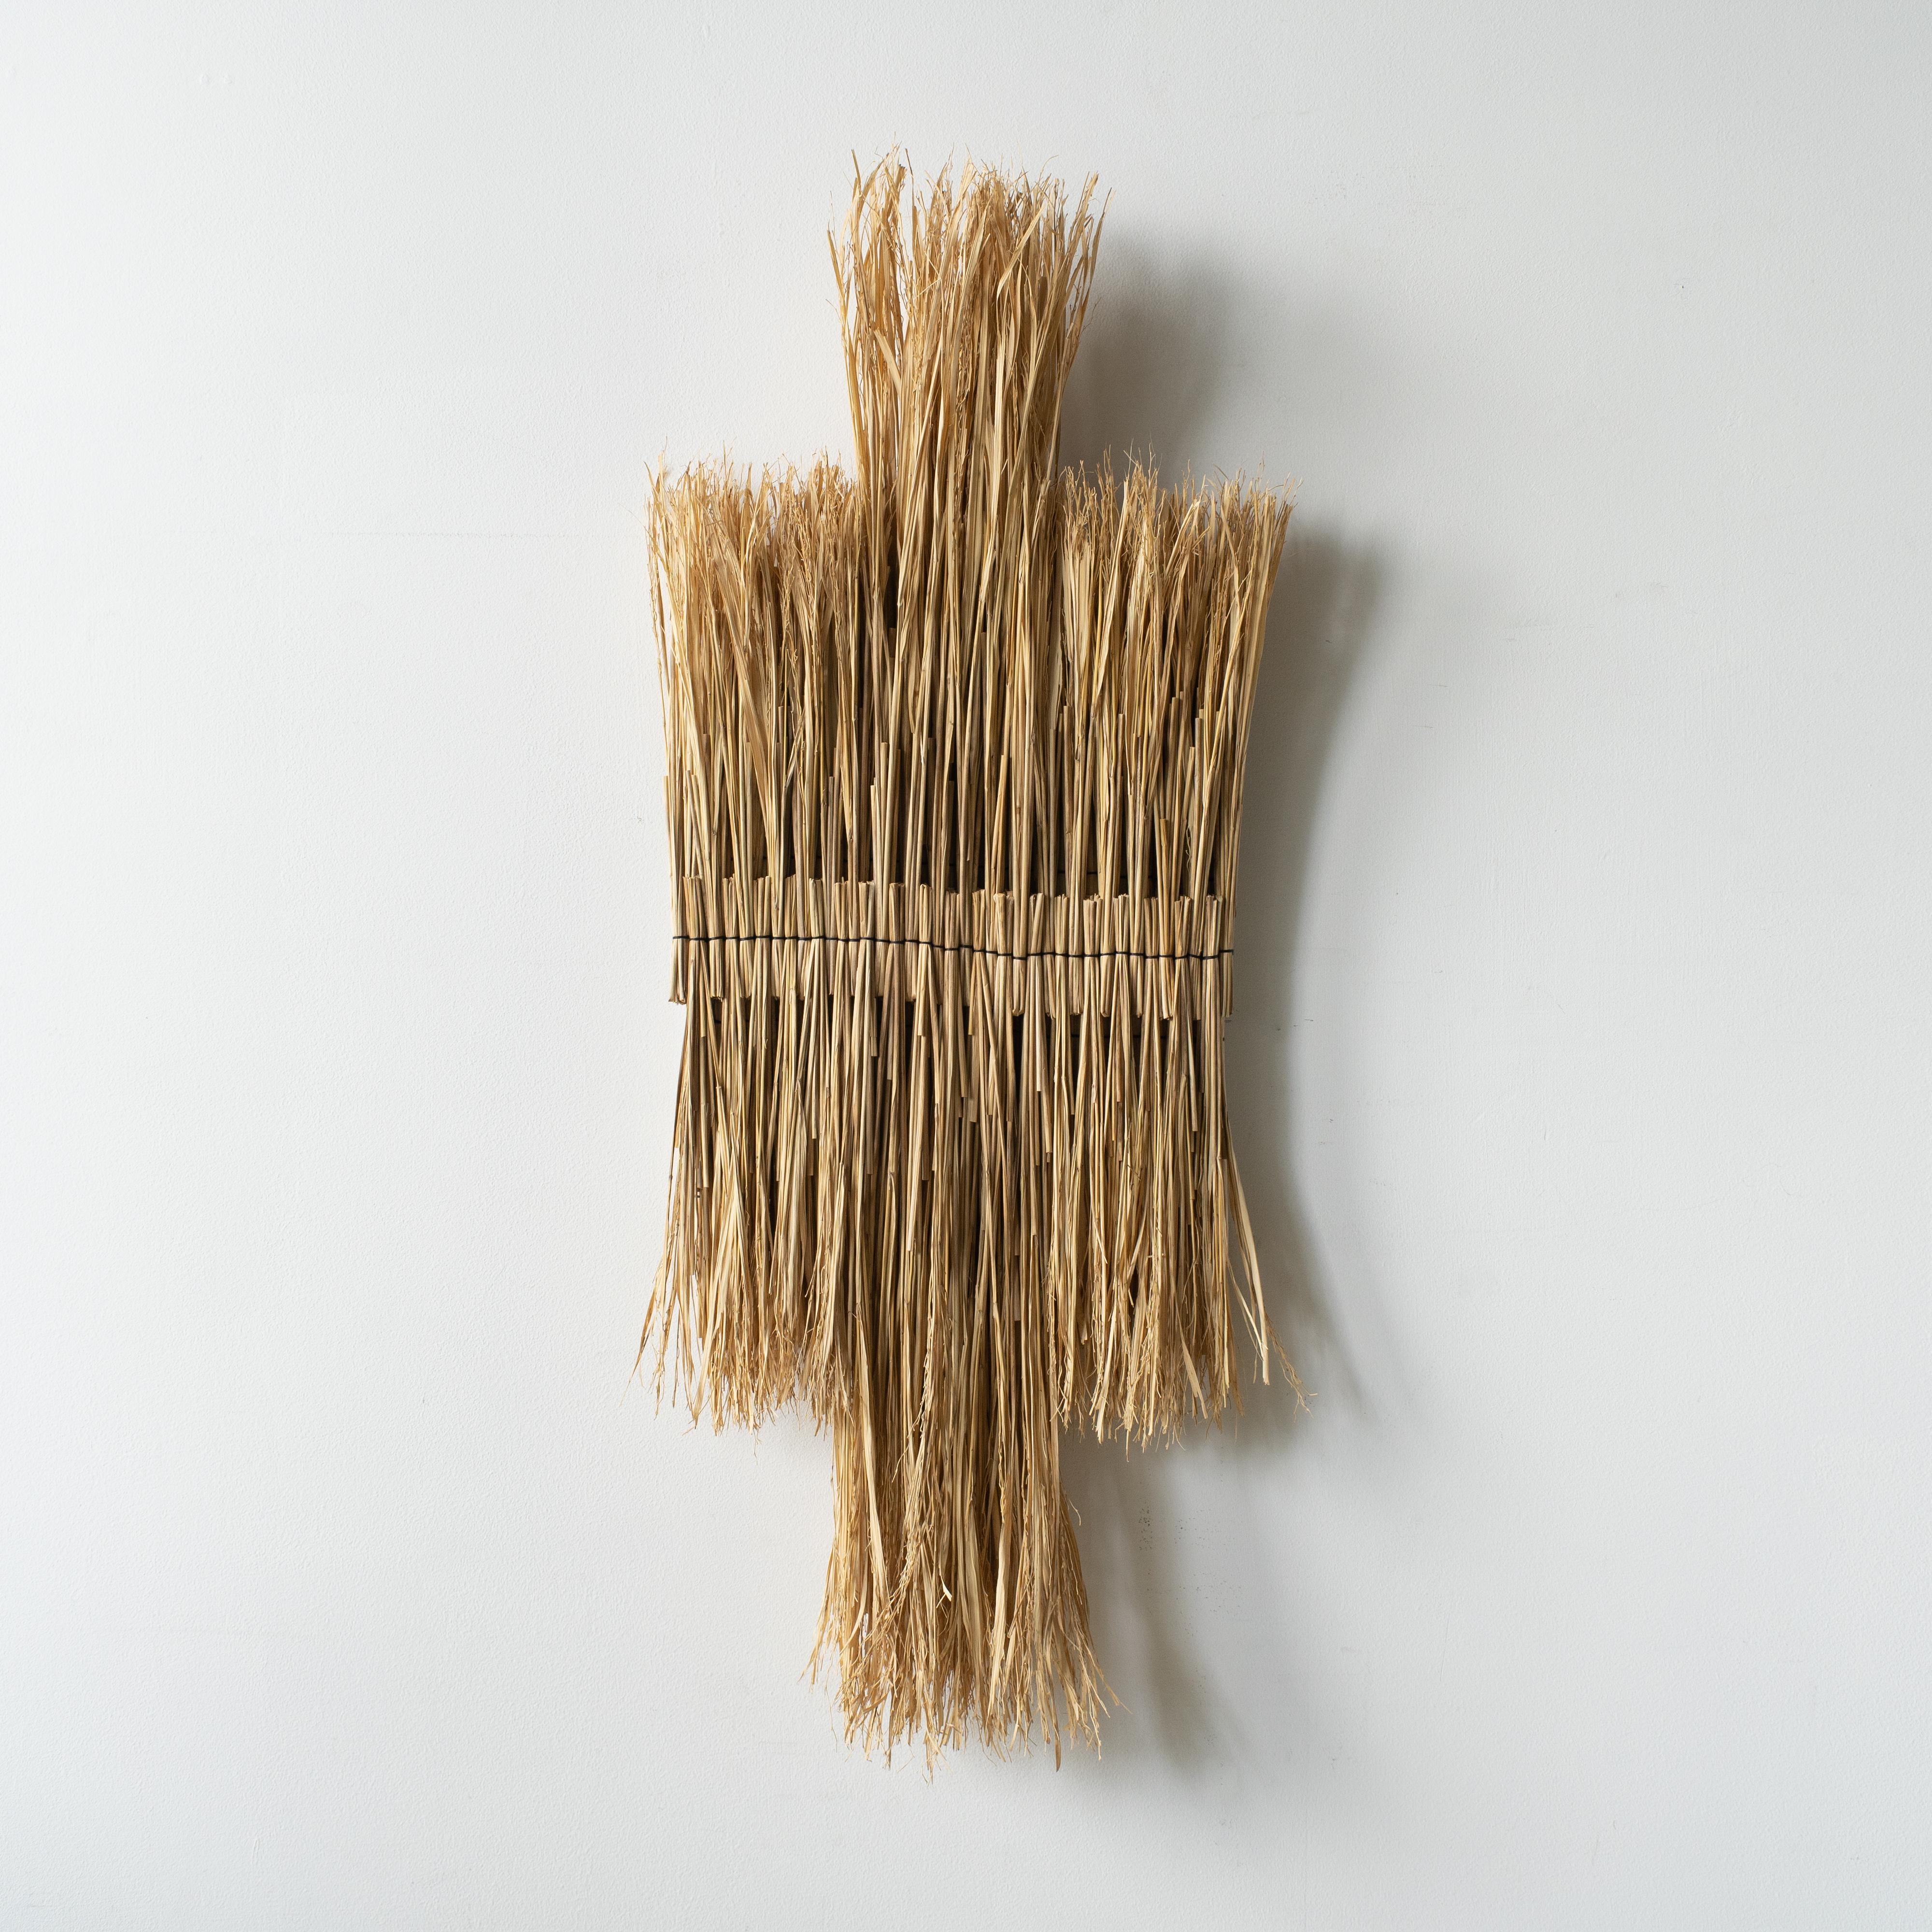 Hand-sewed rice straw art by ARKO. 
Title: Composition Rinforzando
This is one of the series named 